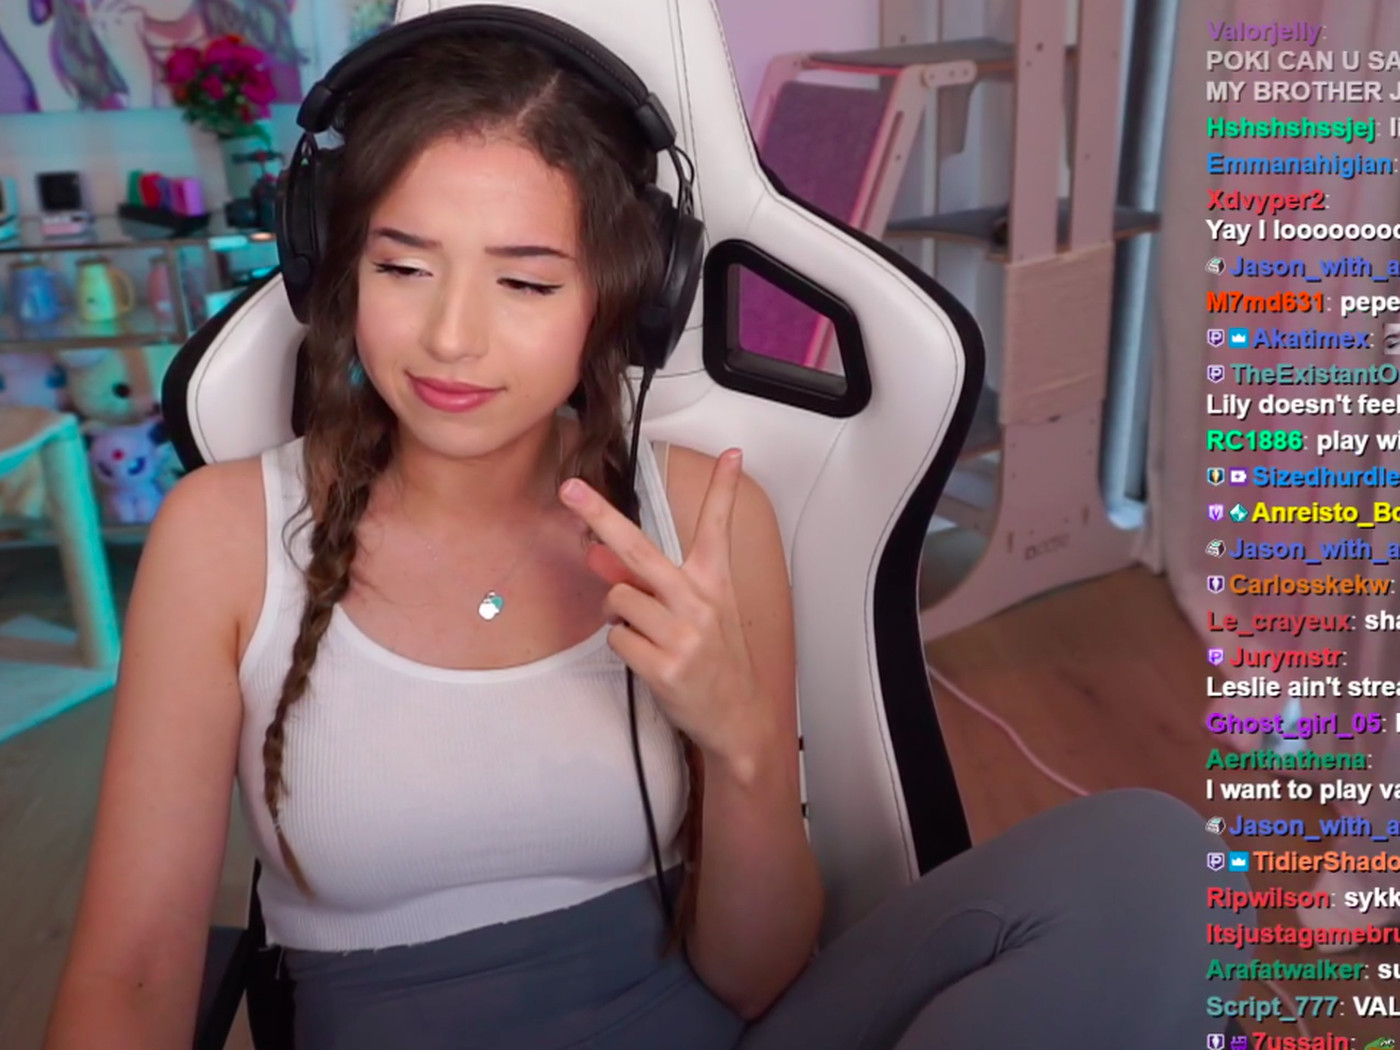 Female Twitch Streamer Banned Because of Inappropriate Chat Web Story